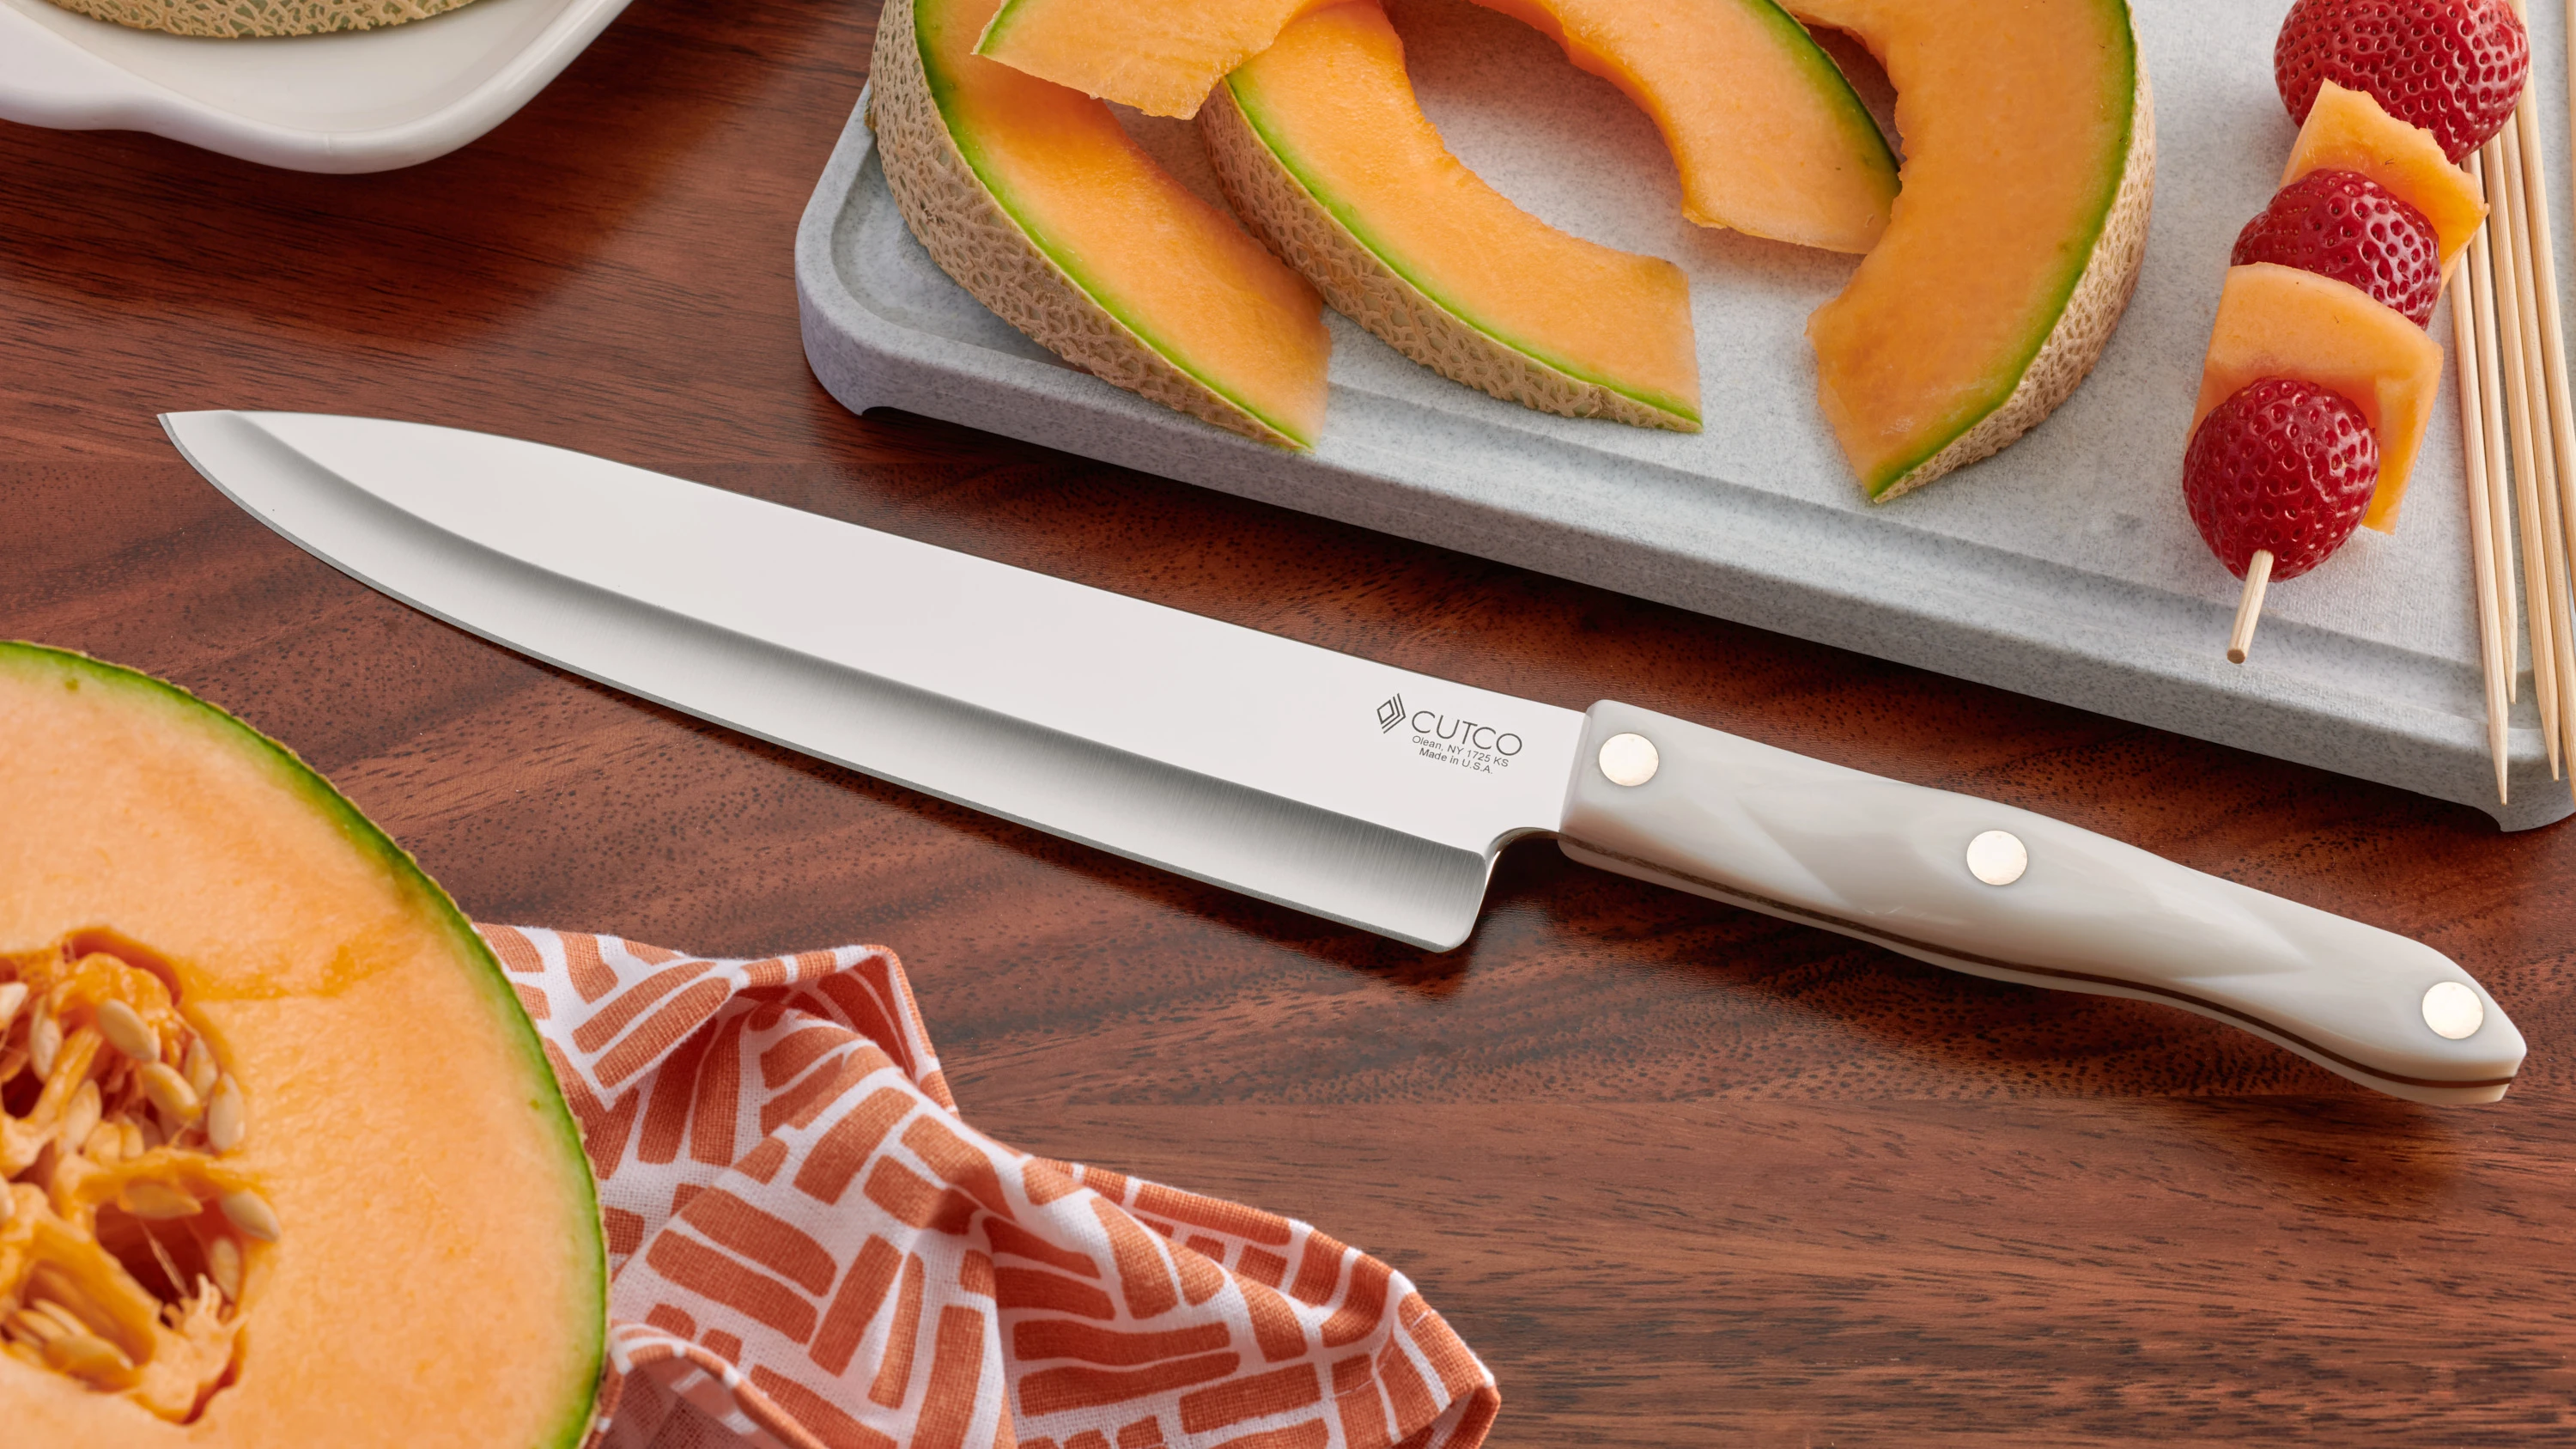 Cutco Petite Chef Knife Review: A sharp knife that's comfortable to hold